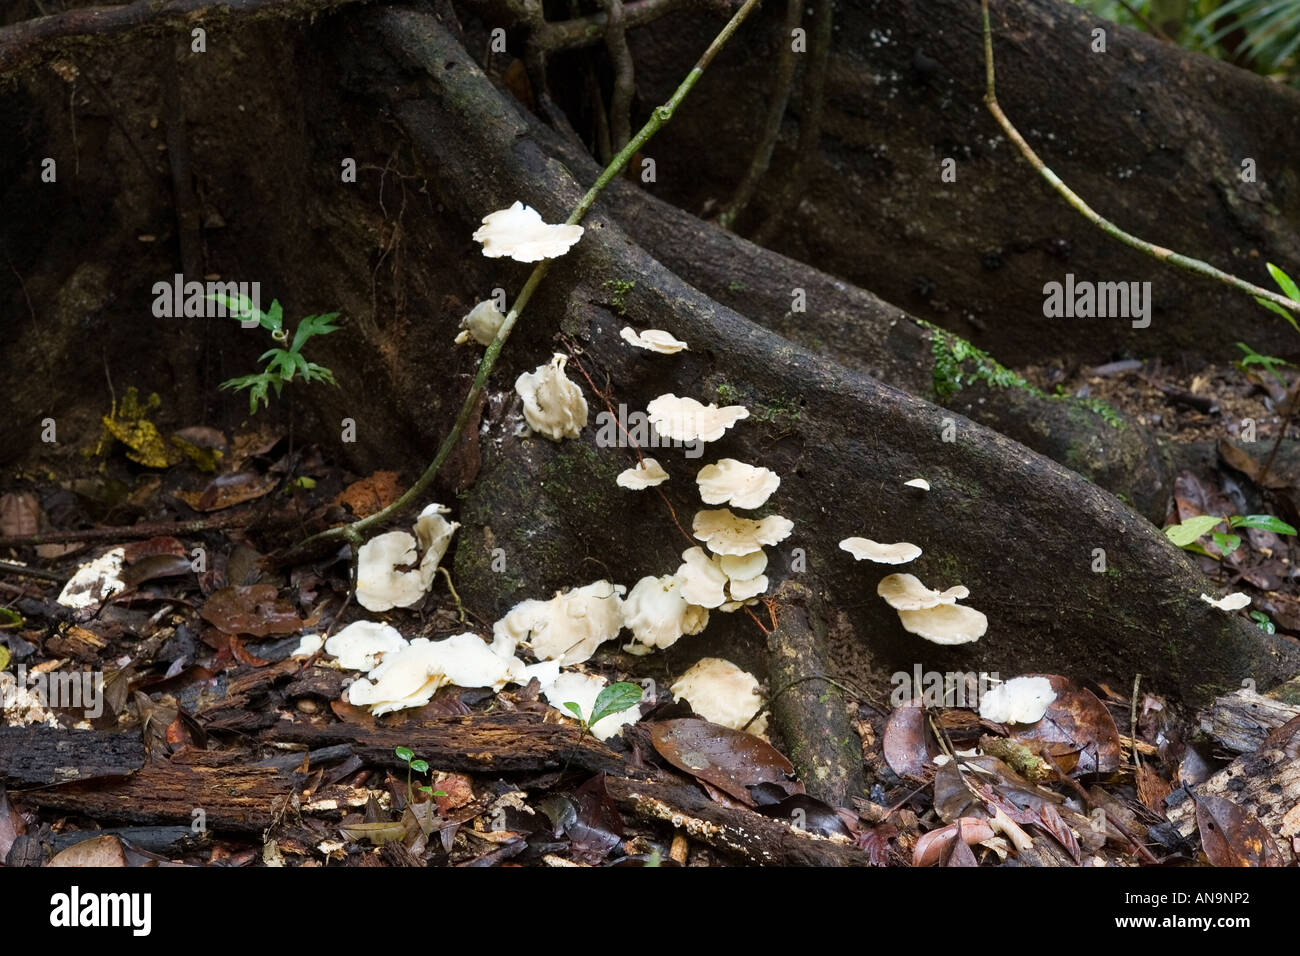 Wood fungus growing on a buttress root in the Daintree Rainforest Queensland Australia Stock Photo